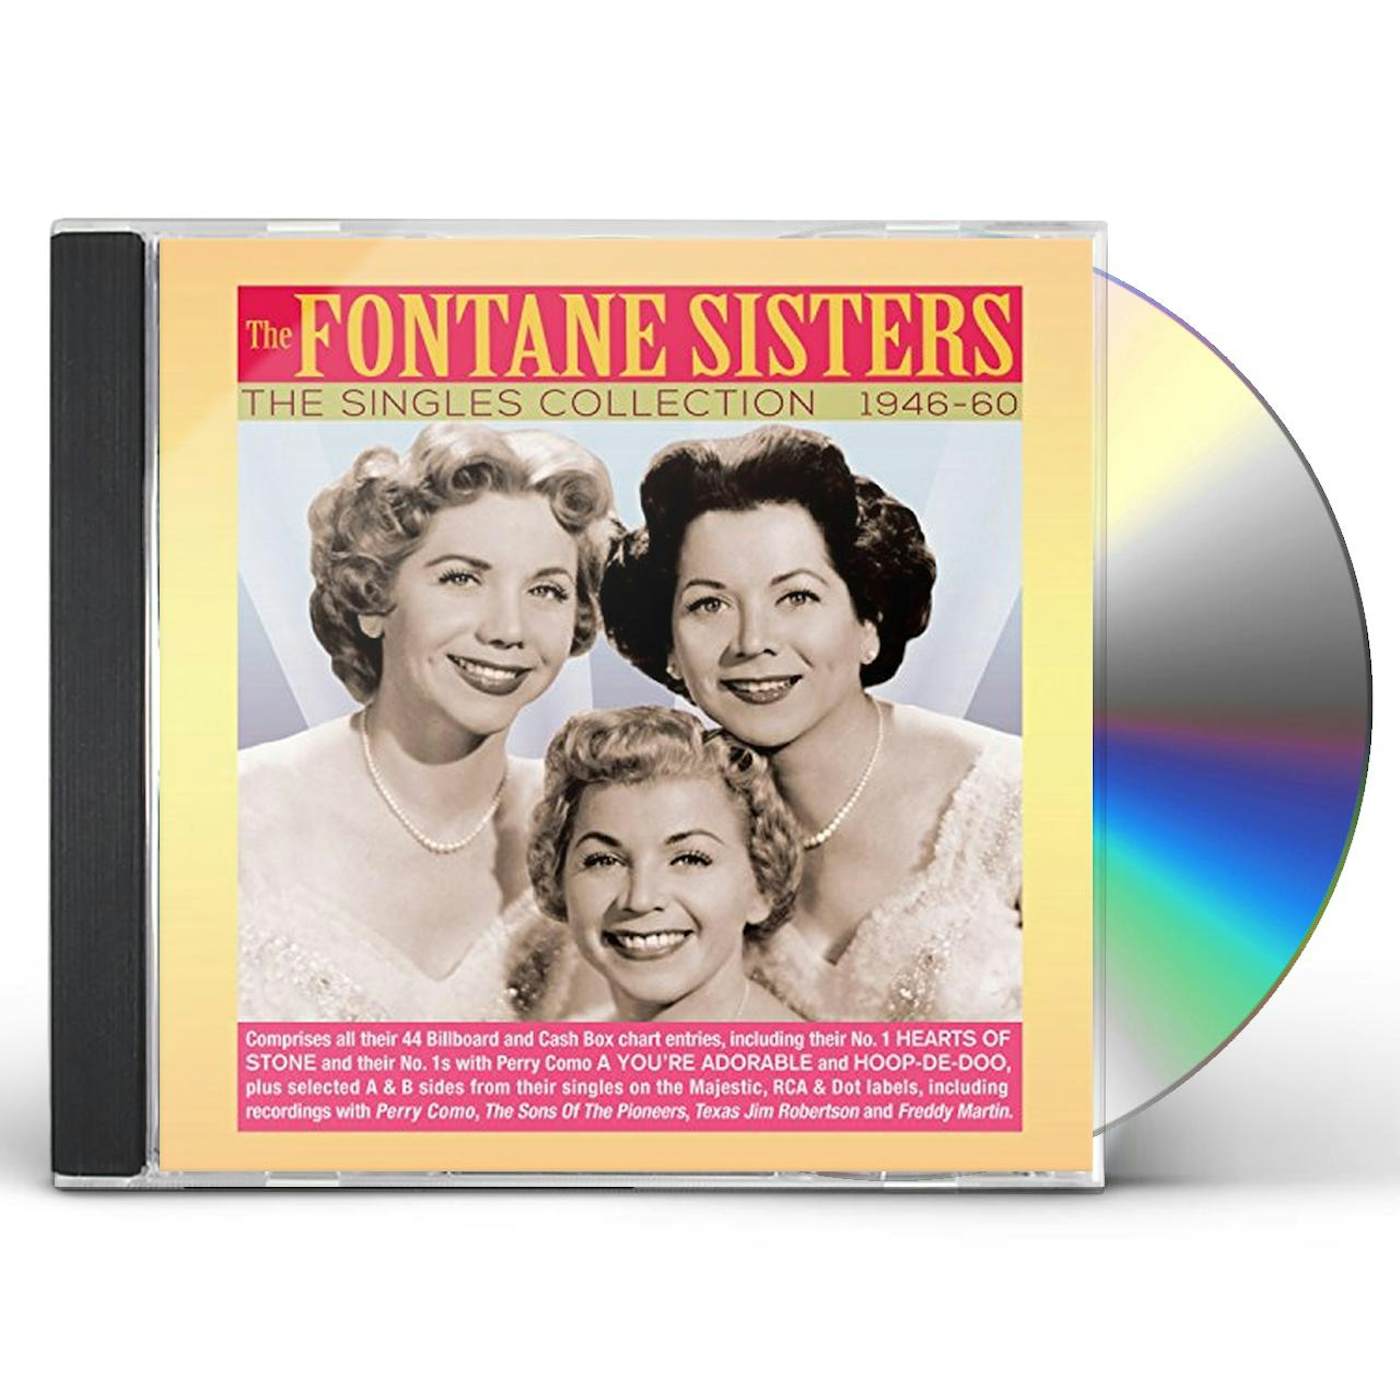 The Fontane Sisters SINGLES COLLECTION 1946-60 CD